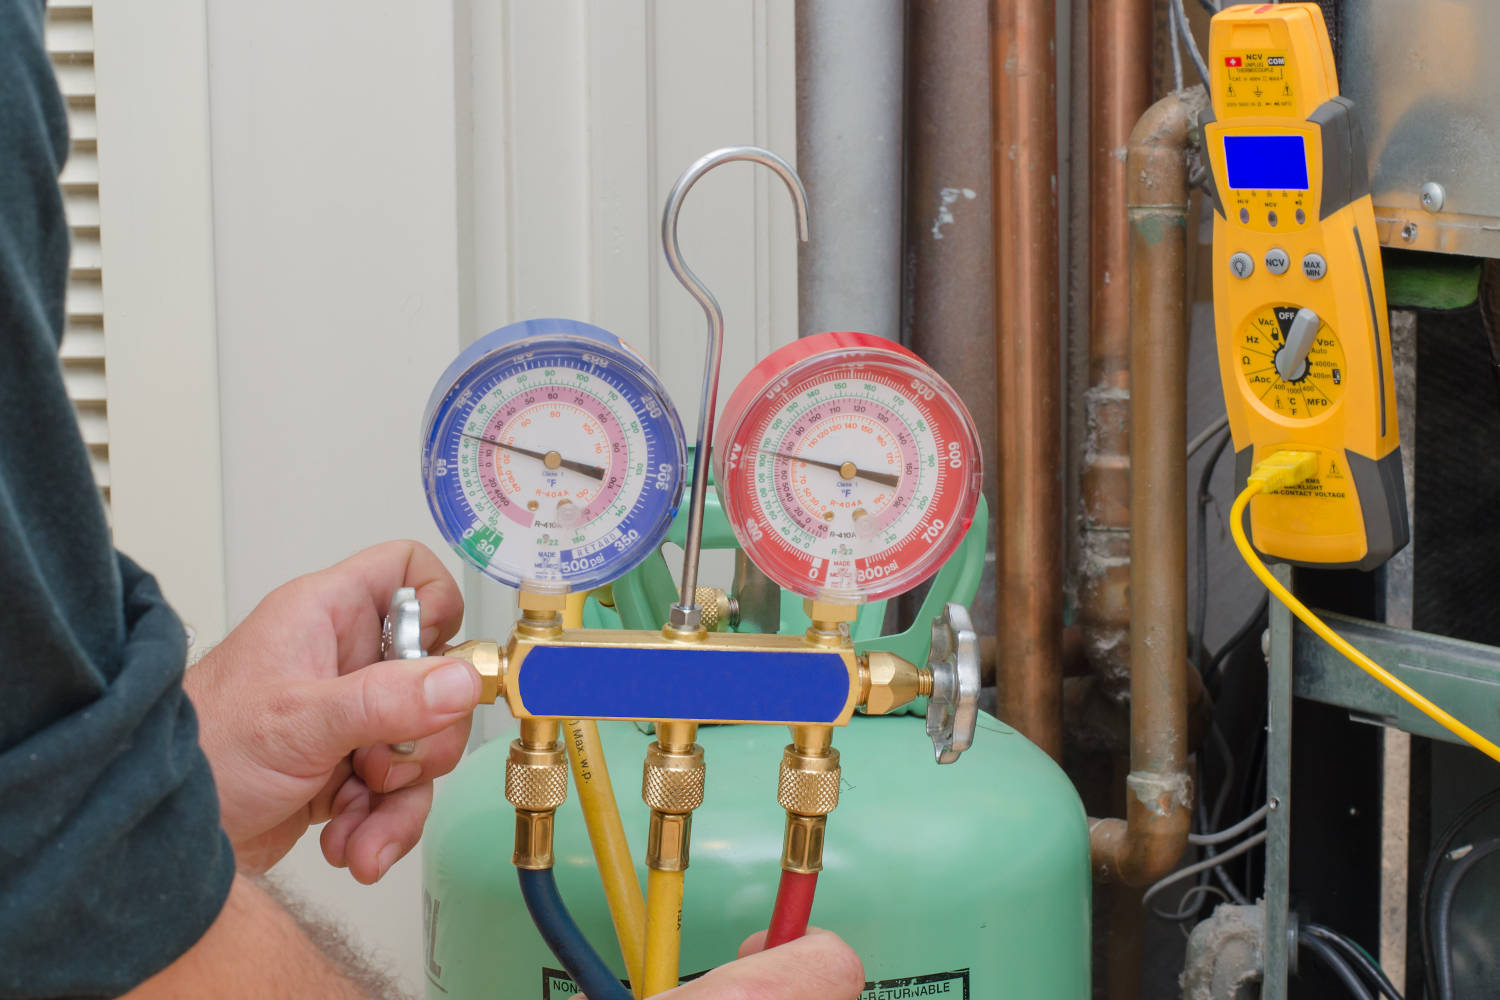 Refrigerant tank and gauges for charging a residential heat pump